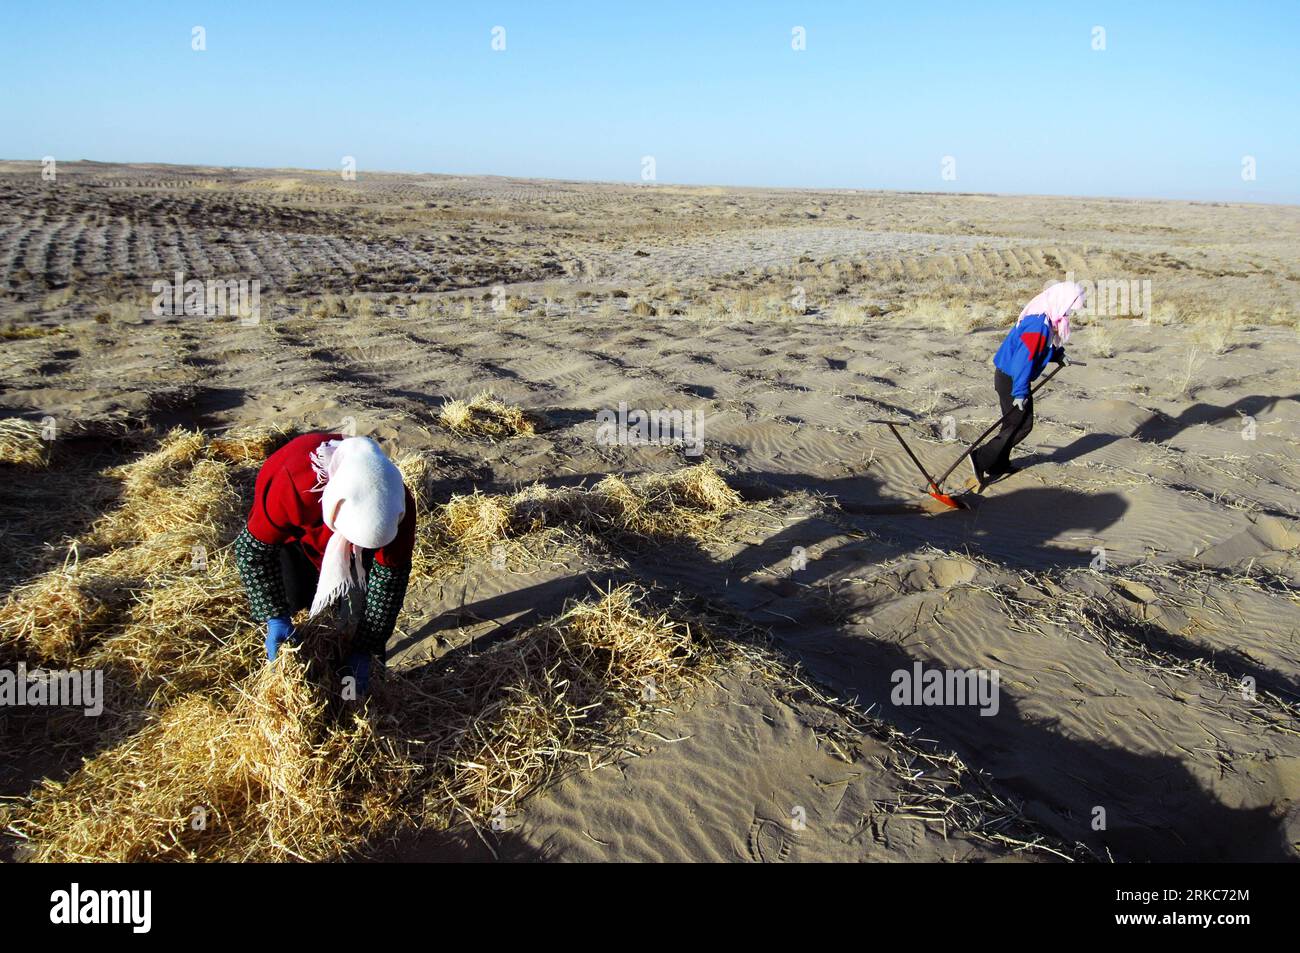 Bildnummer: 54683347  Datum: 27.11.2010  Copyright: imago/Xinhua (101129) -- MINQIN, Nov. 29, 2010 (Xinhua) -- Local farmers fixate sand with wheat straws and achnatherum splendens in the Laohukou desert in Minqin County, northwest China s Gansu Province, Nov. 27, 2010. Located in Minqin County, the Qingtu Lake, suffered from drought for over 50 years, witnessed three square kilometers of water surface again after 8.6 million cubic meters of water from Shiyang River were infused into the lake by the end of October this year. Extensive farming since the 1950s sapped underground water in Minqin Stock Photo